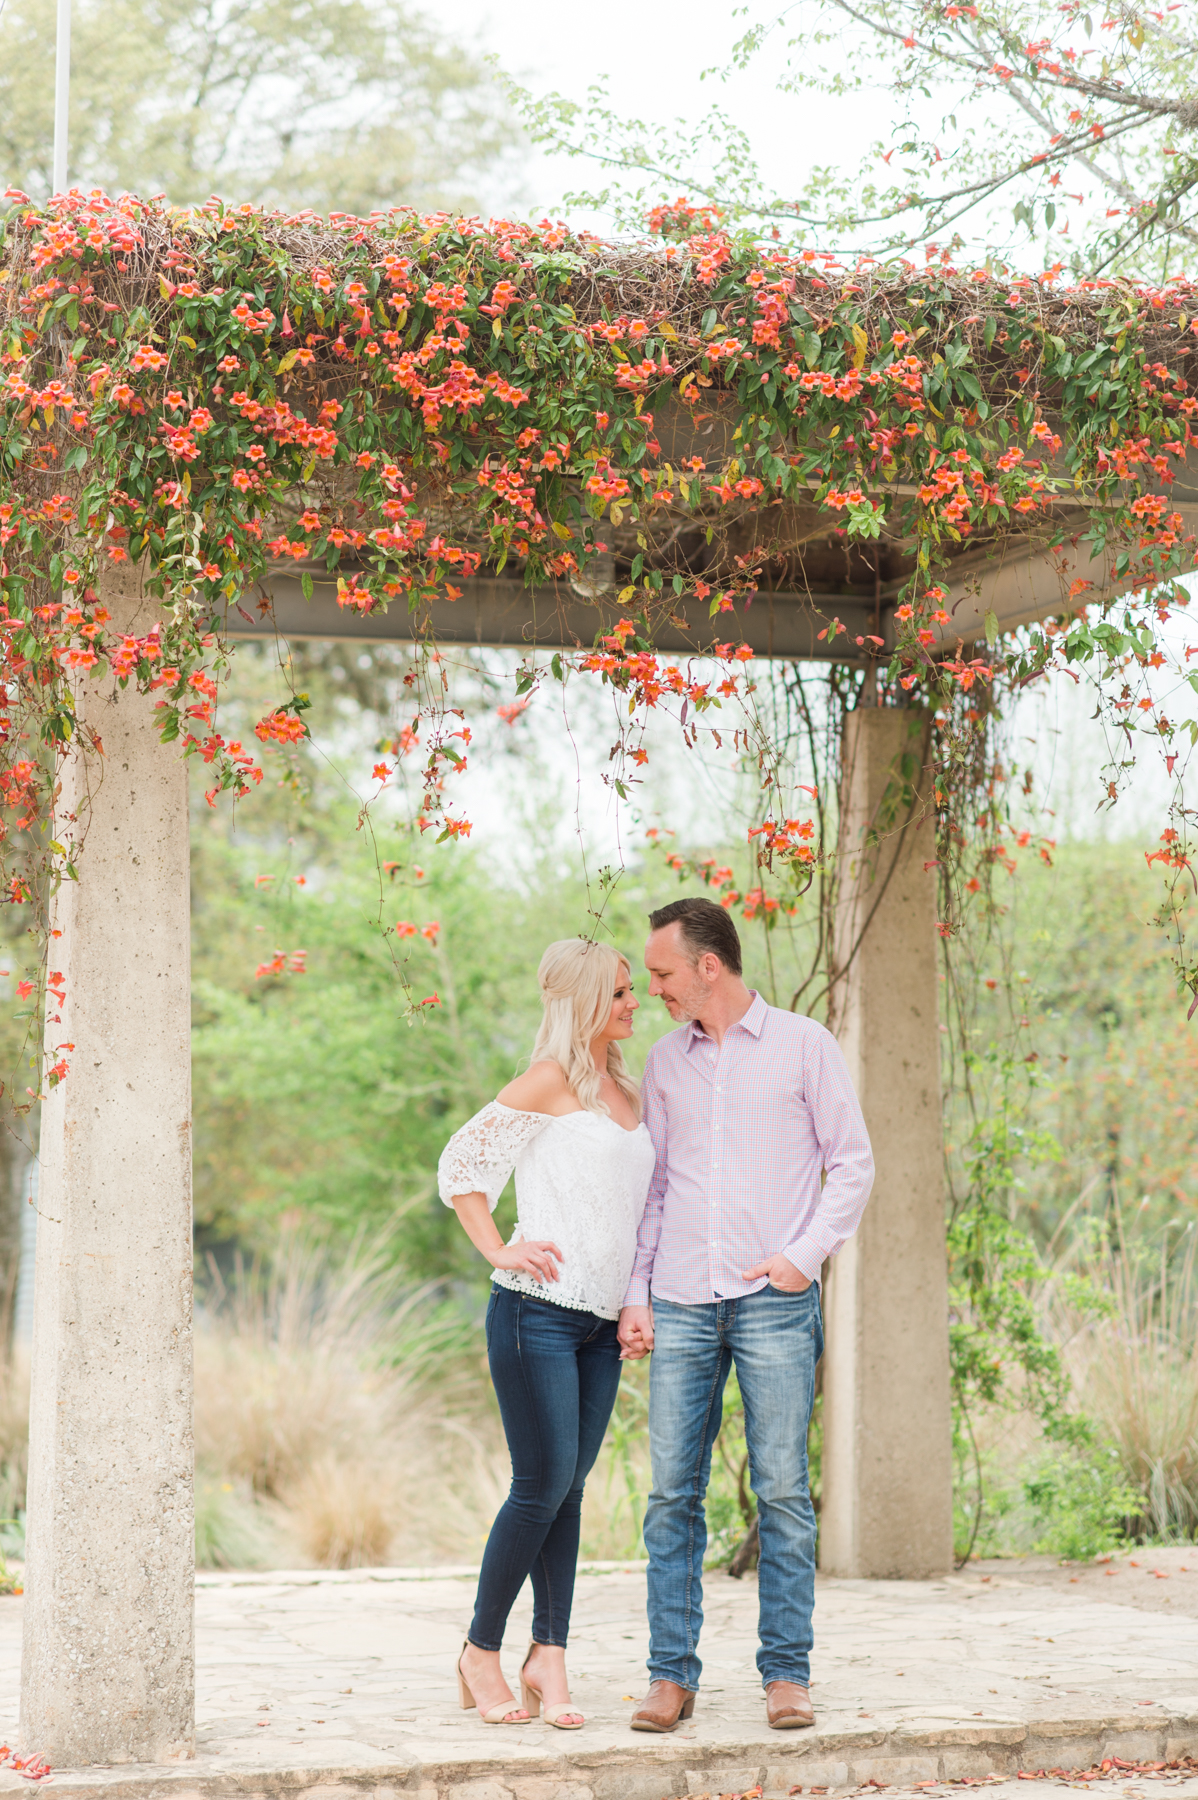 The couple poses under the trellis.